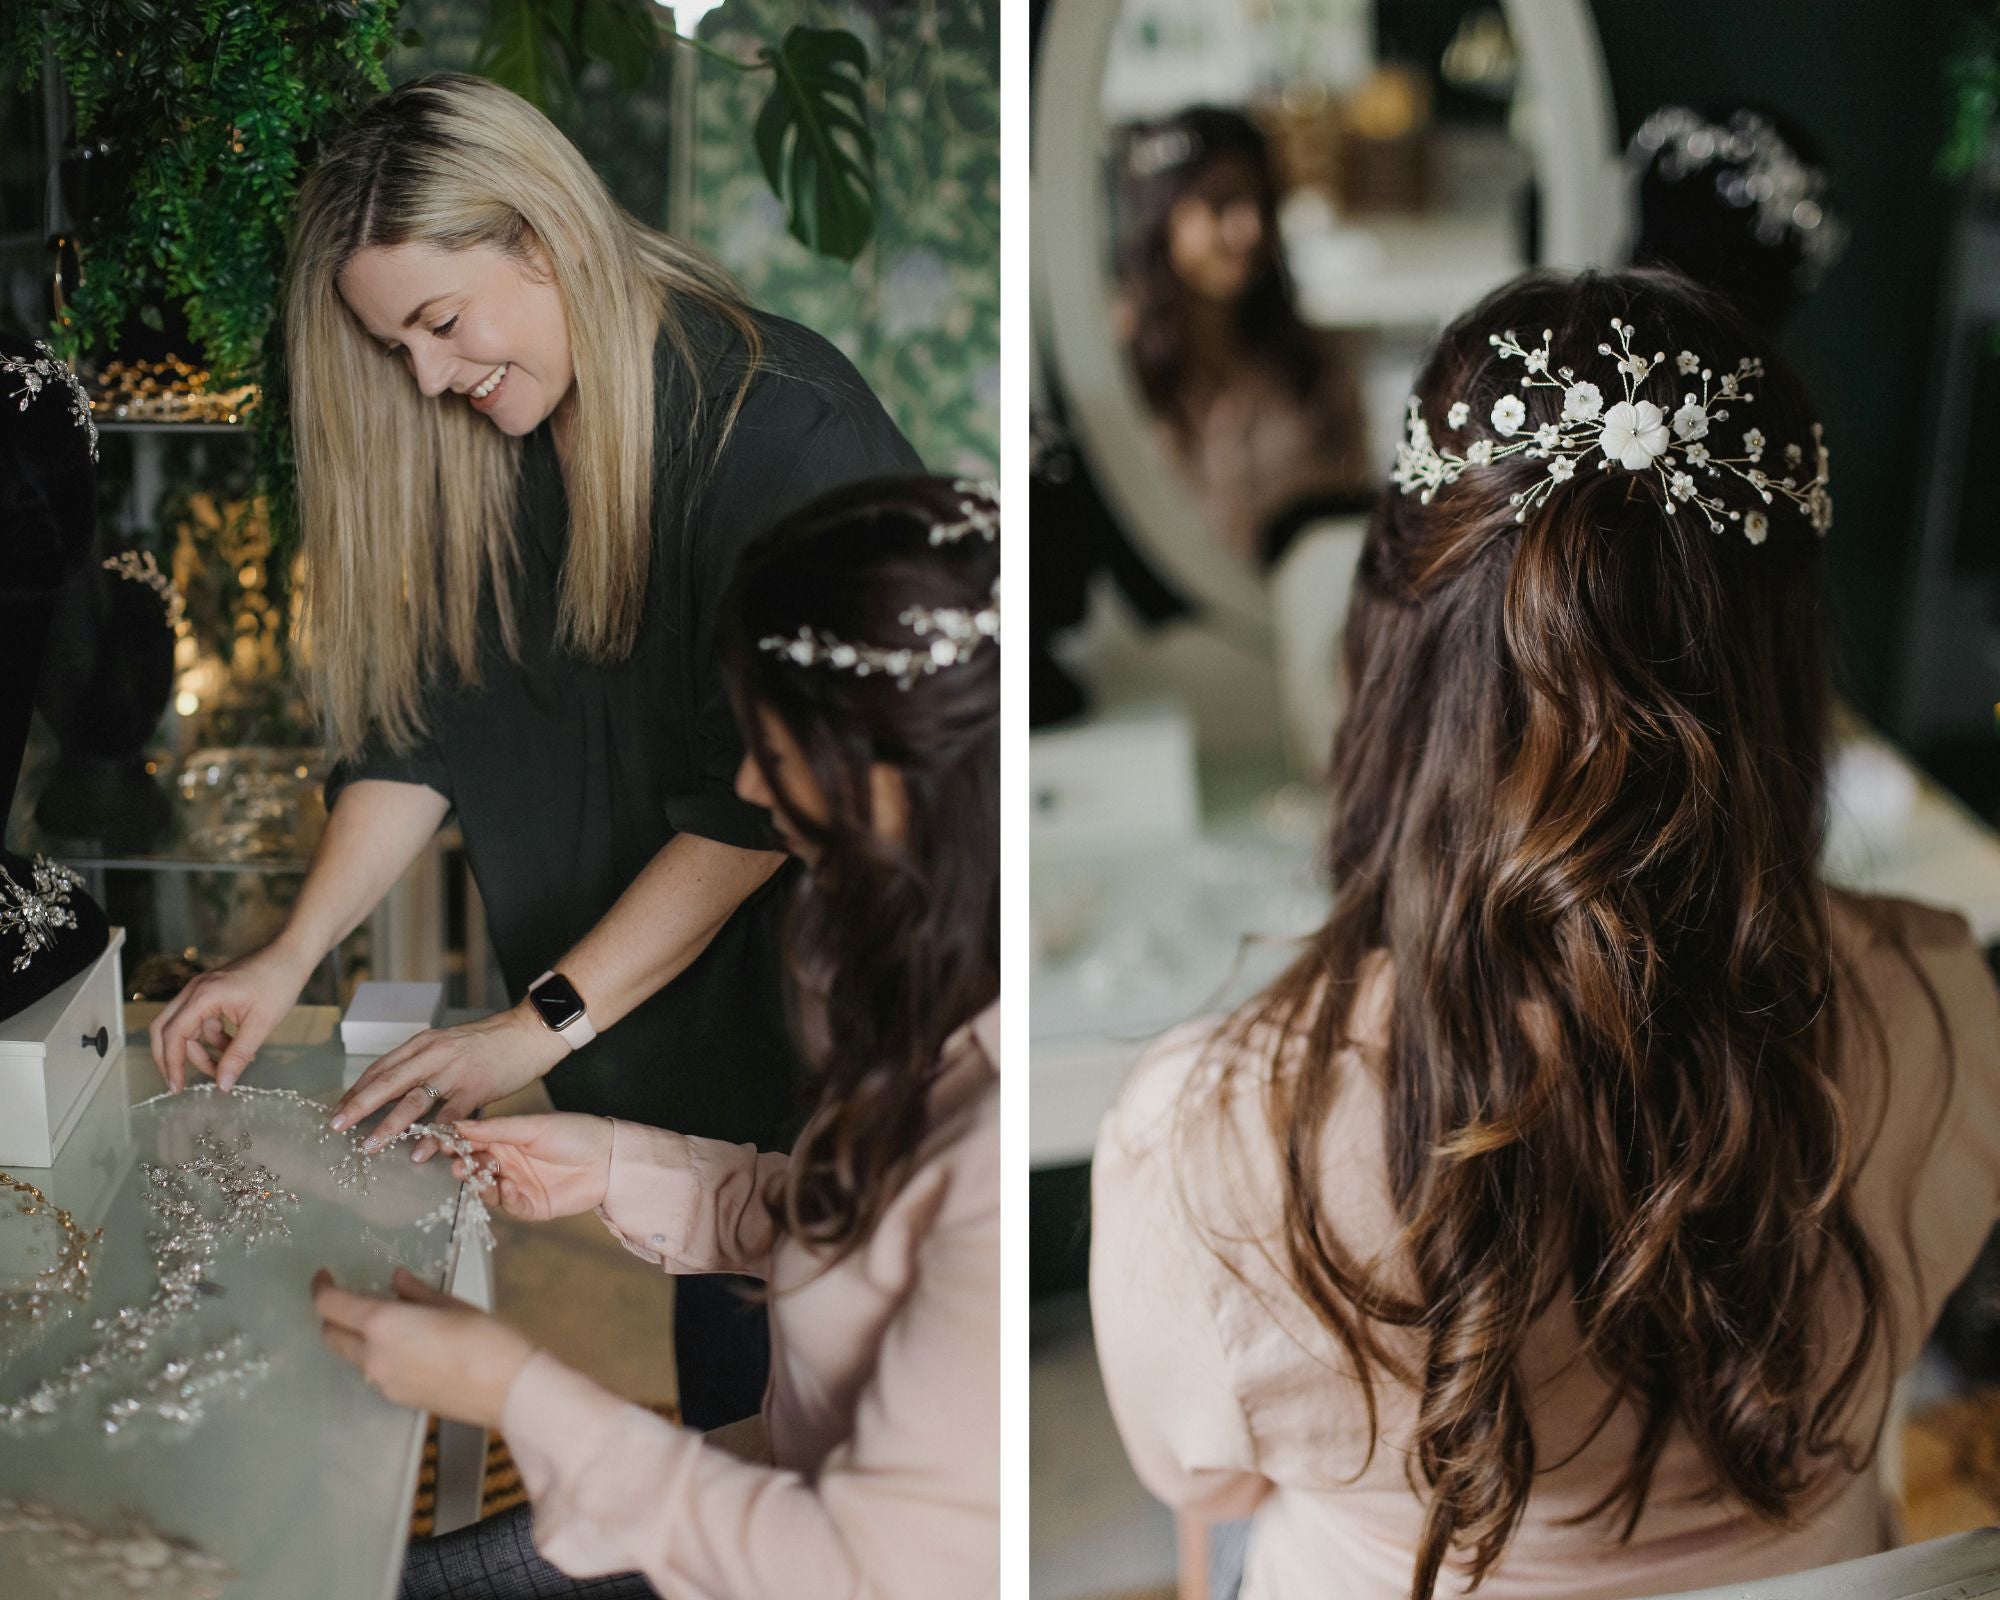 Debbie Carlisle during a bespoke bridal hair accessory consultation with a bride - showing and trying on hair accessory designs